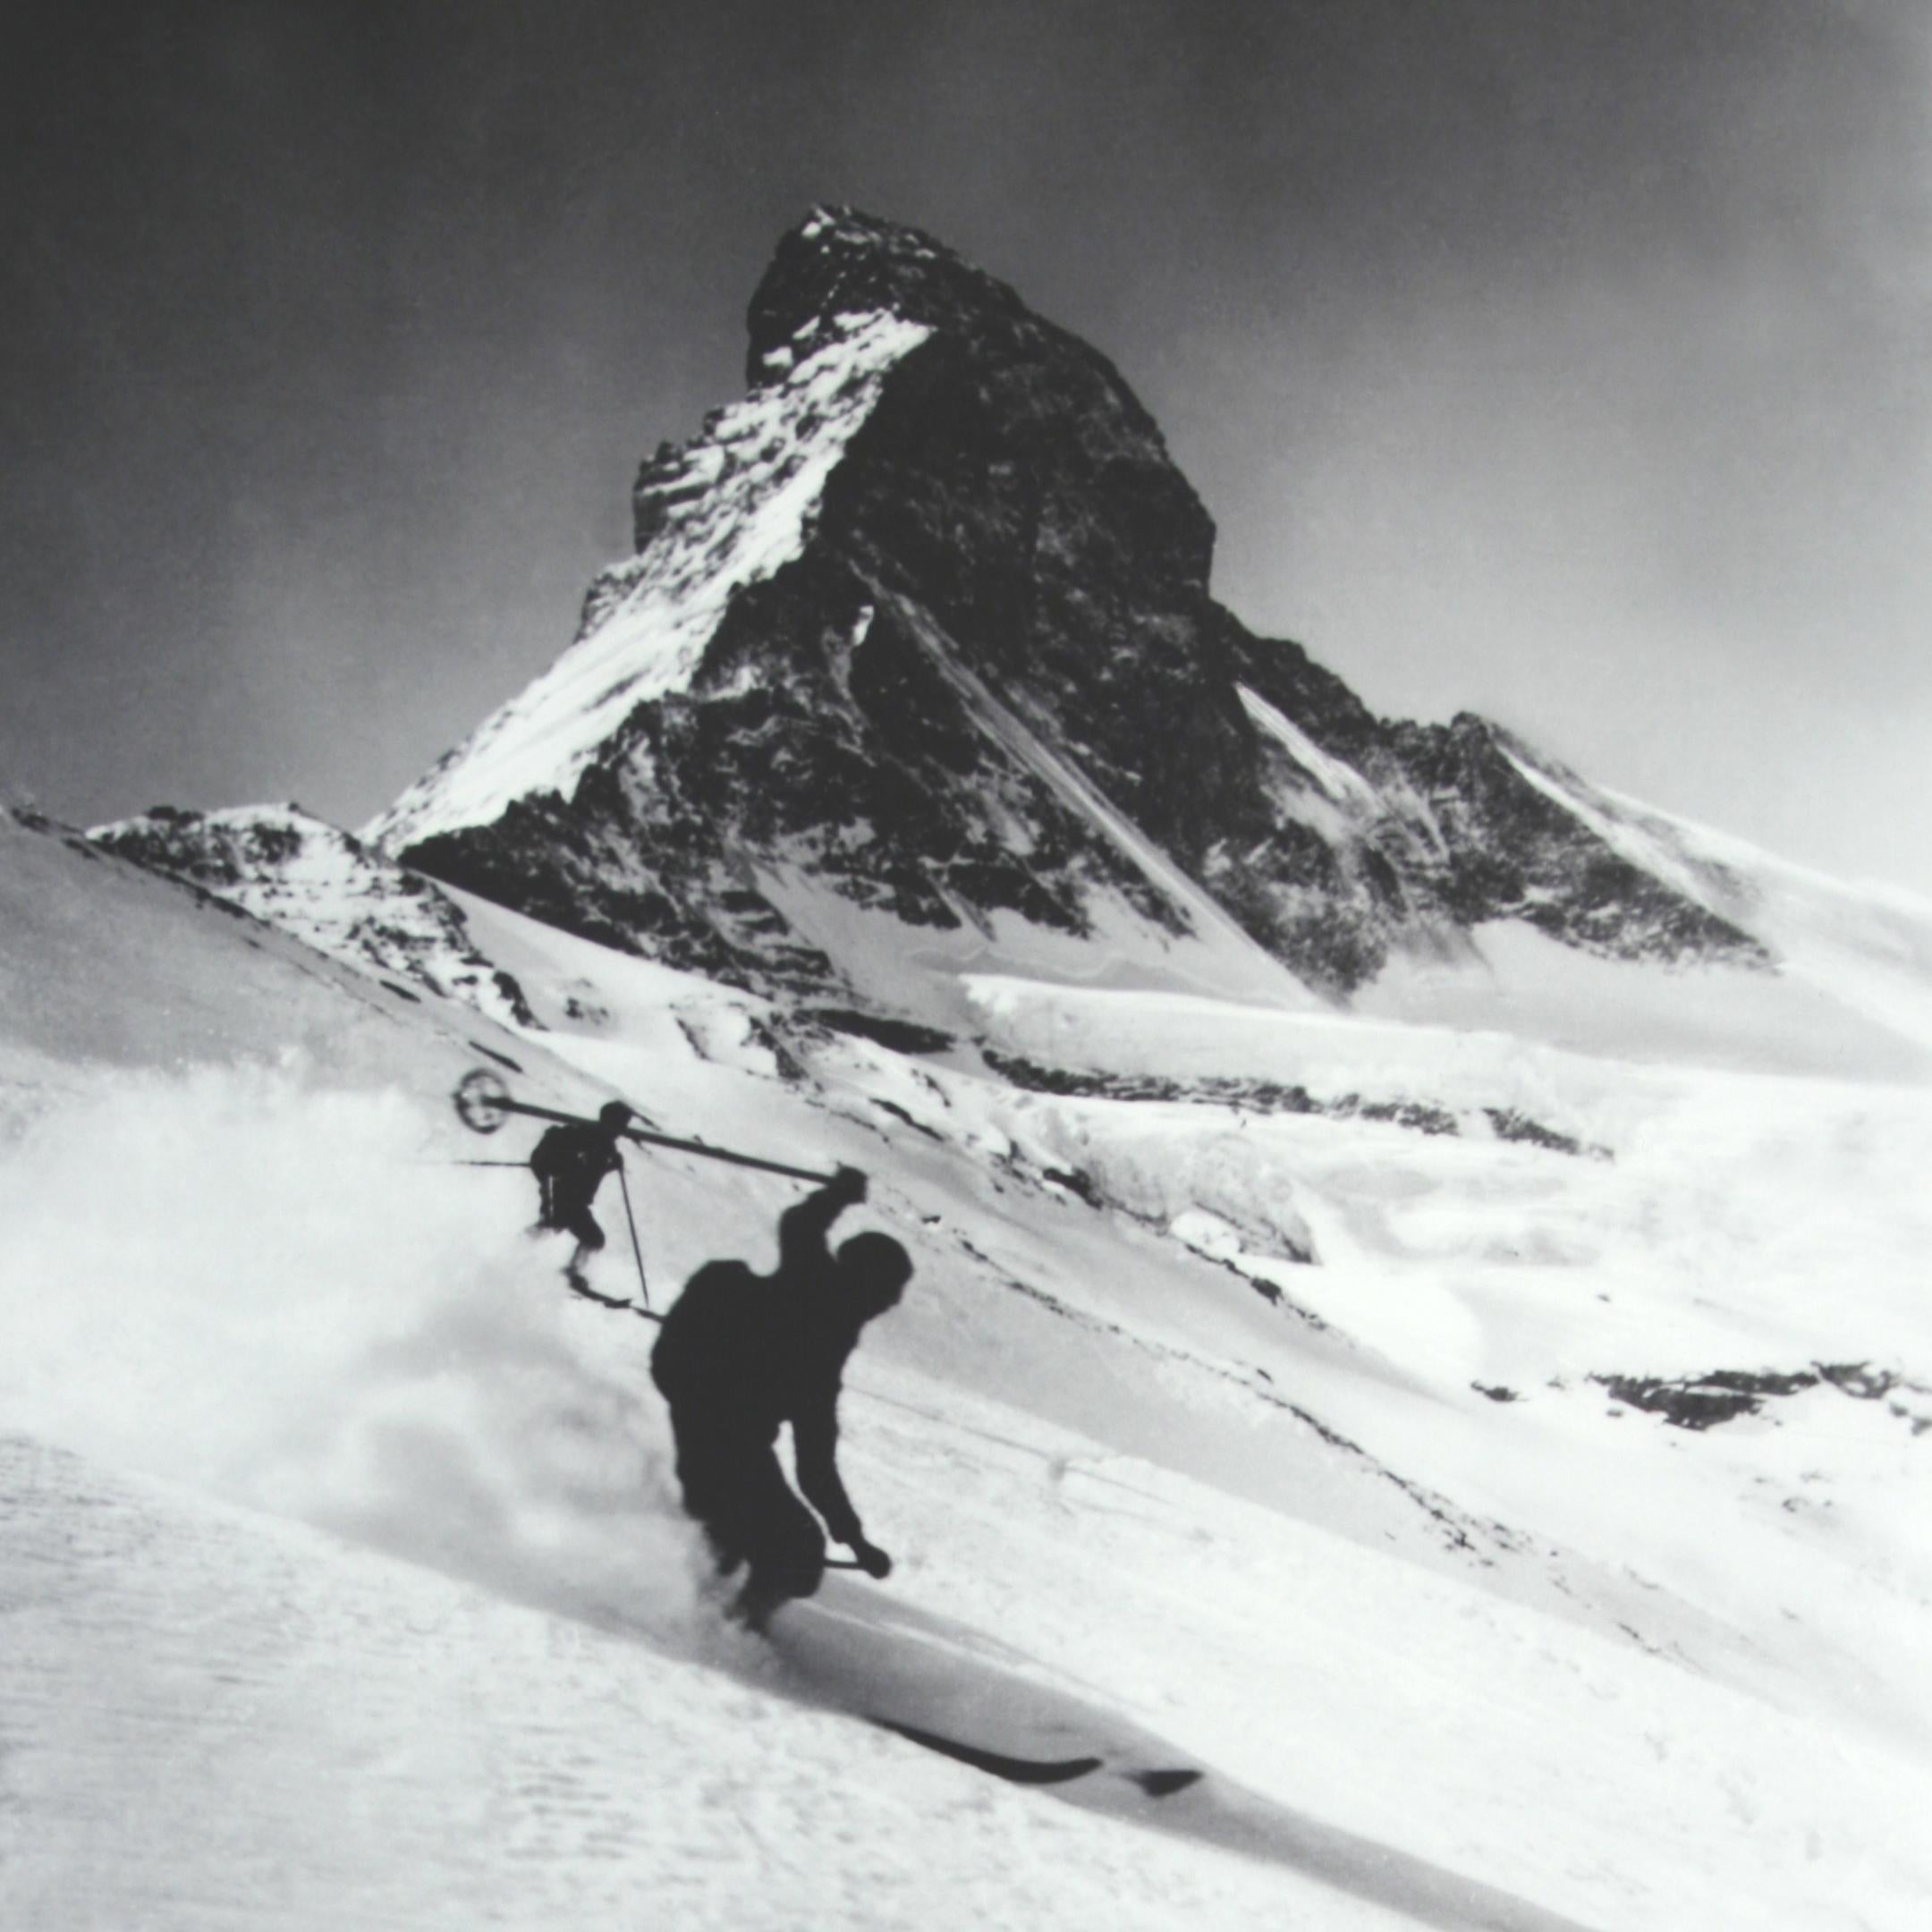 Vintage Style Ski Photography, Framed Alpine Ski Photograph, Matterhorn & Skiers In Good Condition For Sale In Oxfordshire, GB